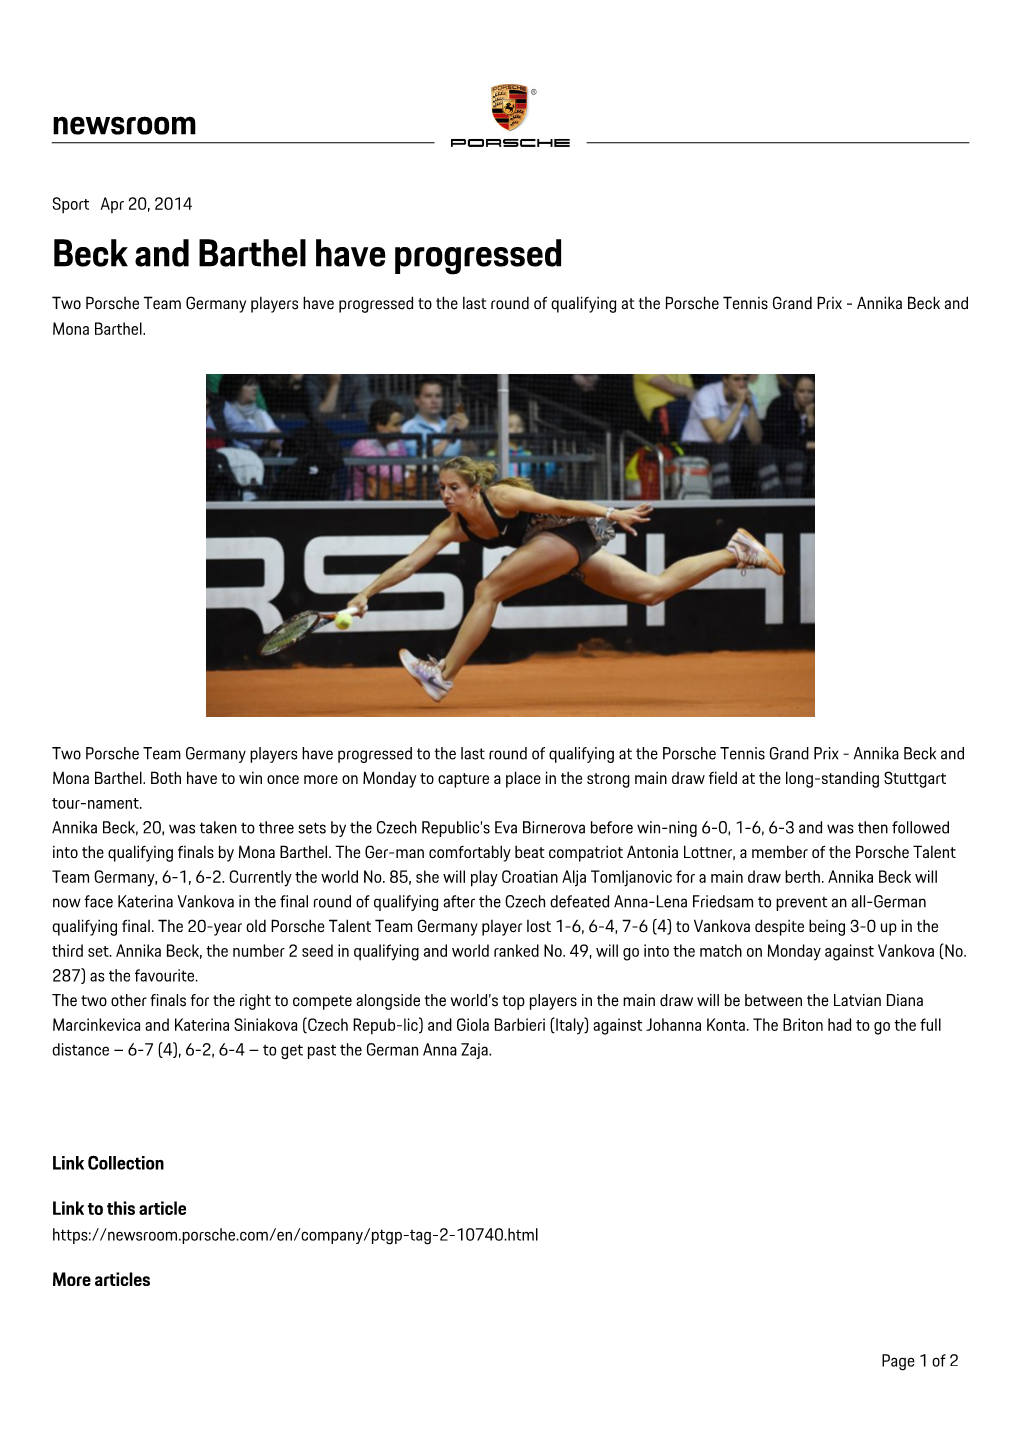 Beck and Barthel Have Progressed